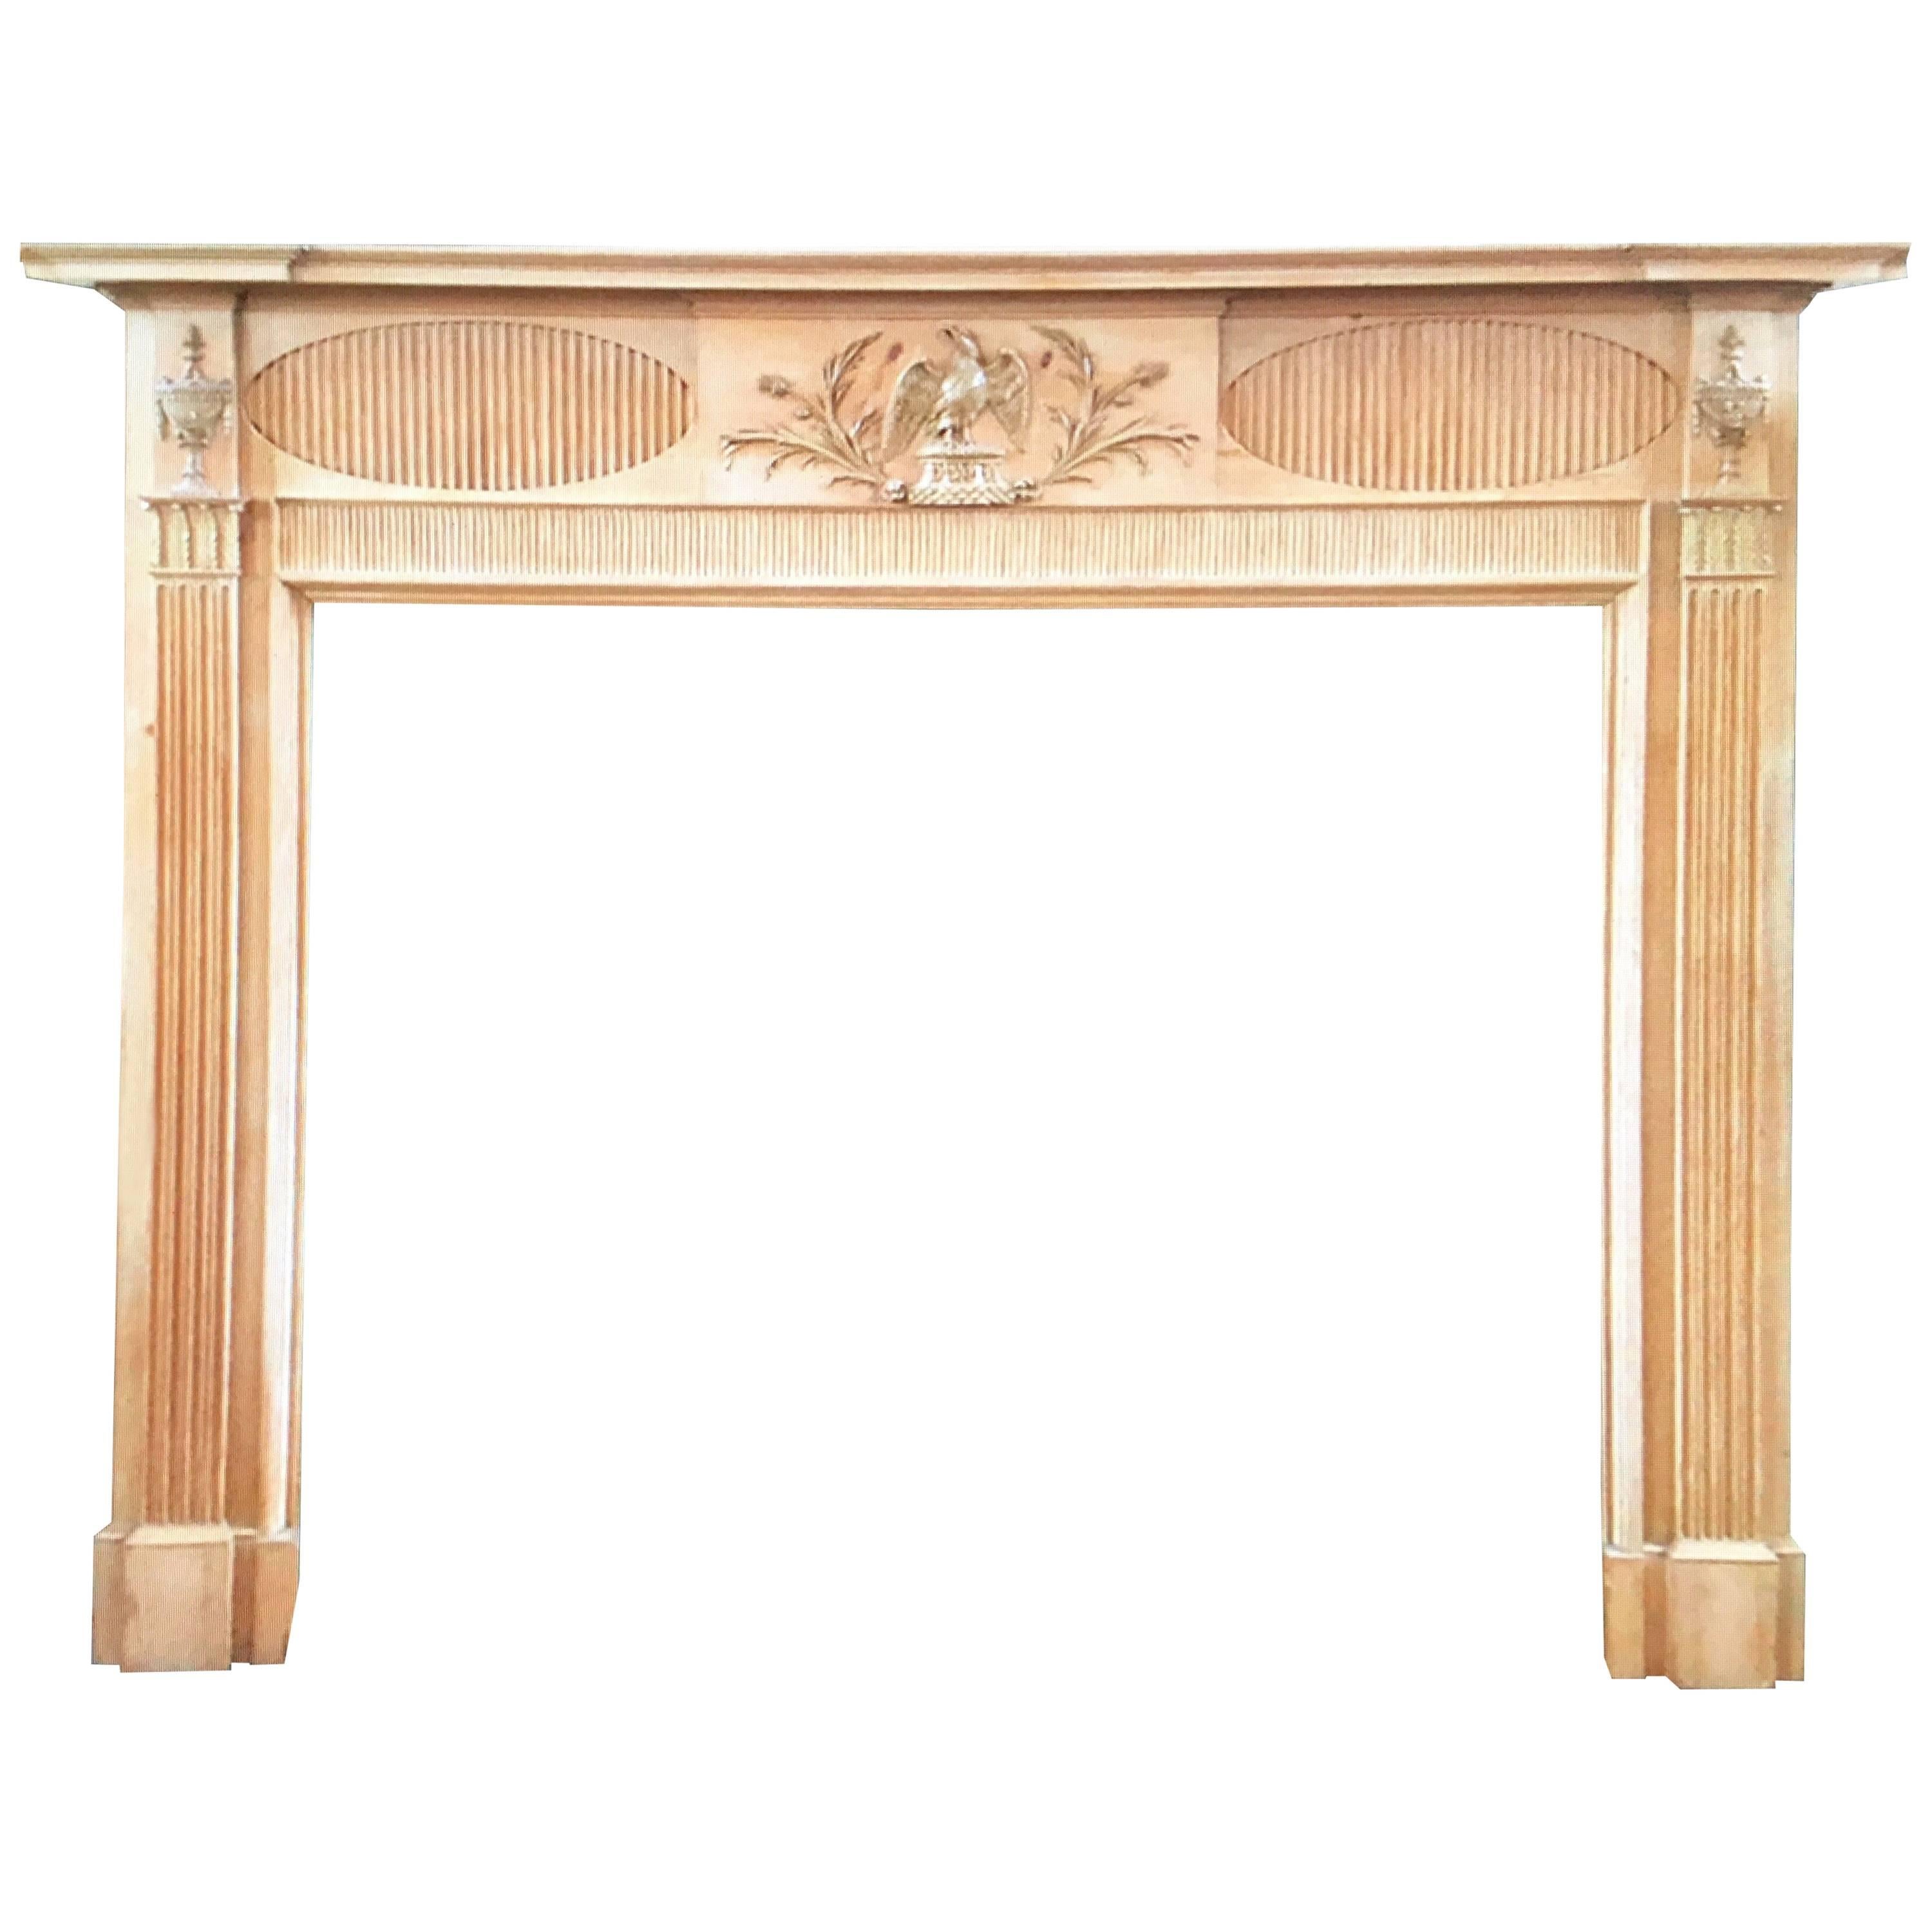 Early 19th Century Antique Pine & Gesso Georgian Timber Fireplace Surround